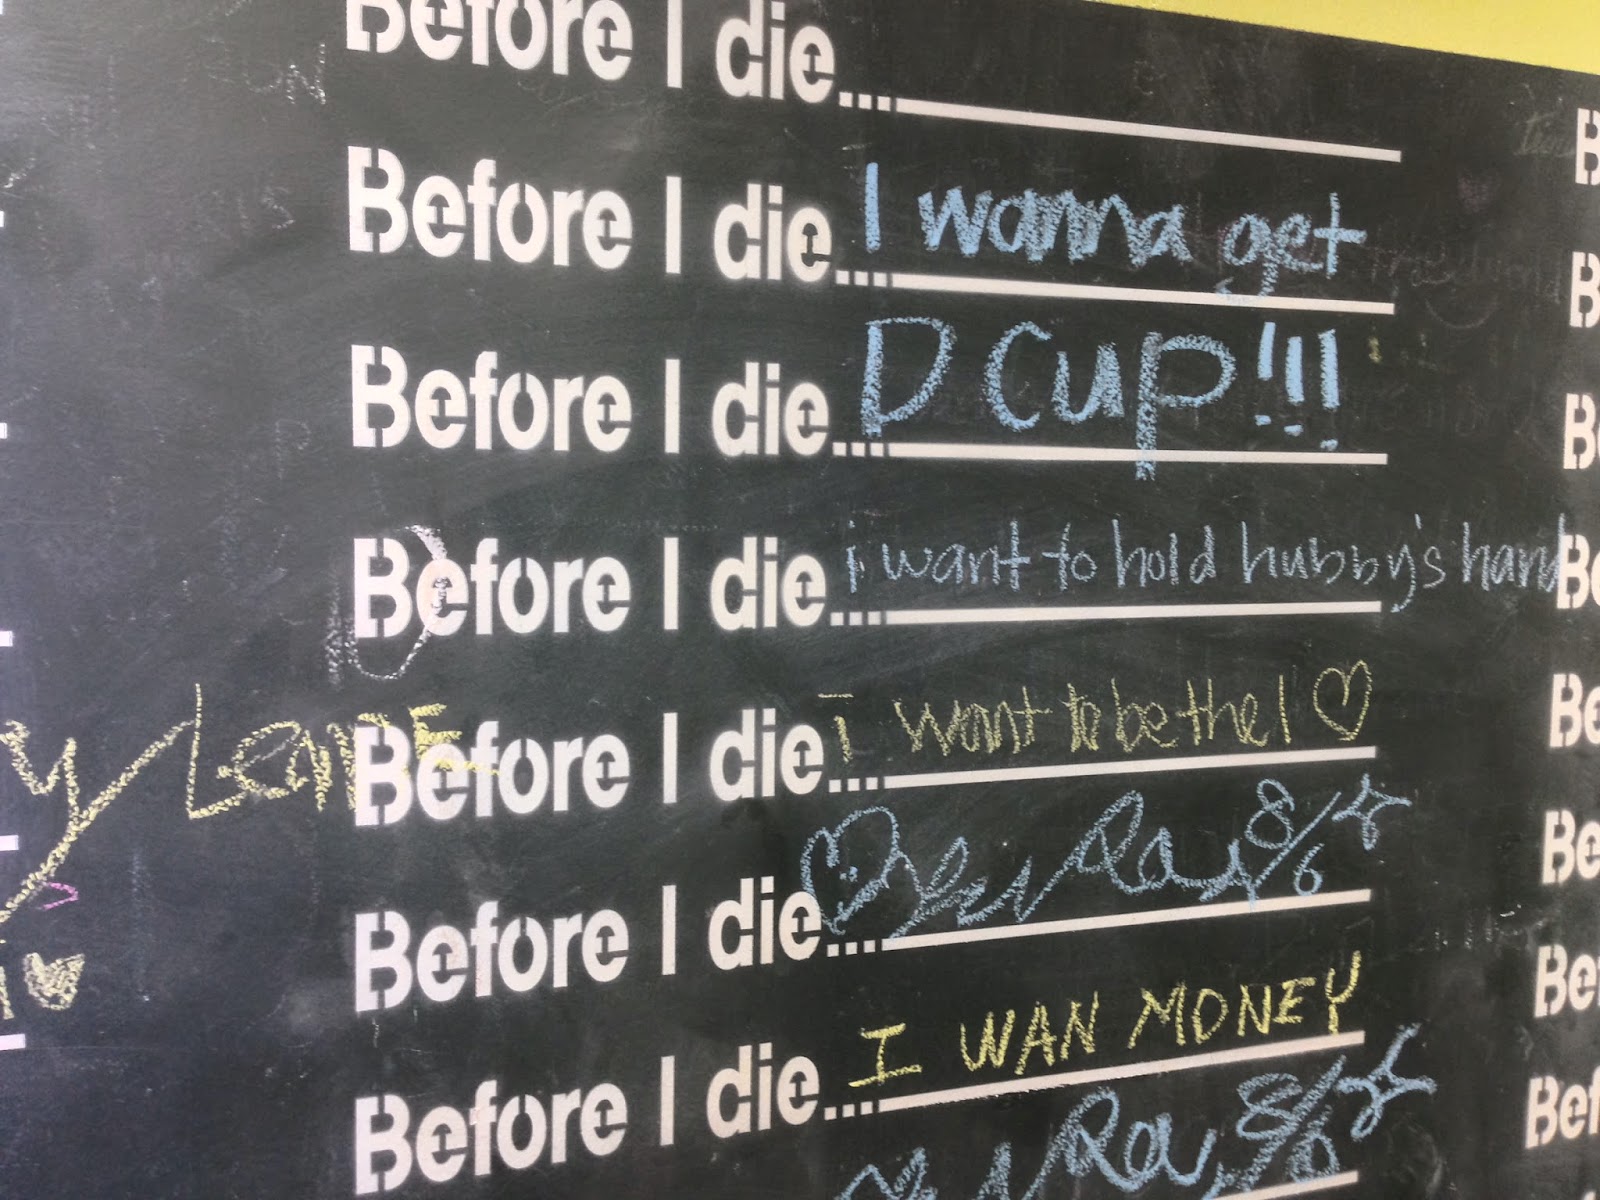 D-Cup dying wish